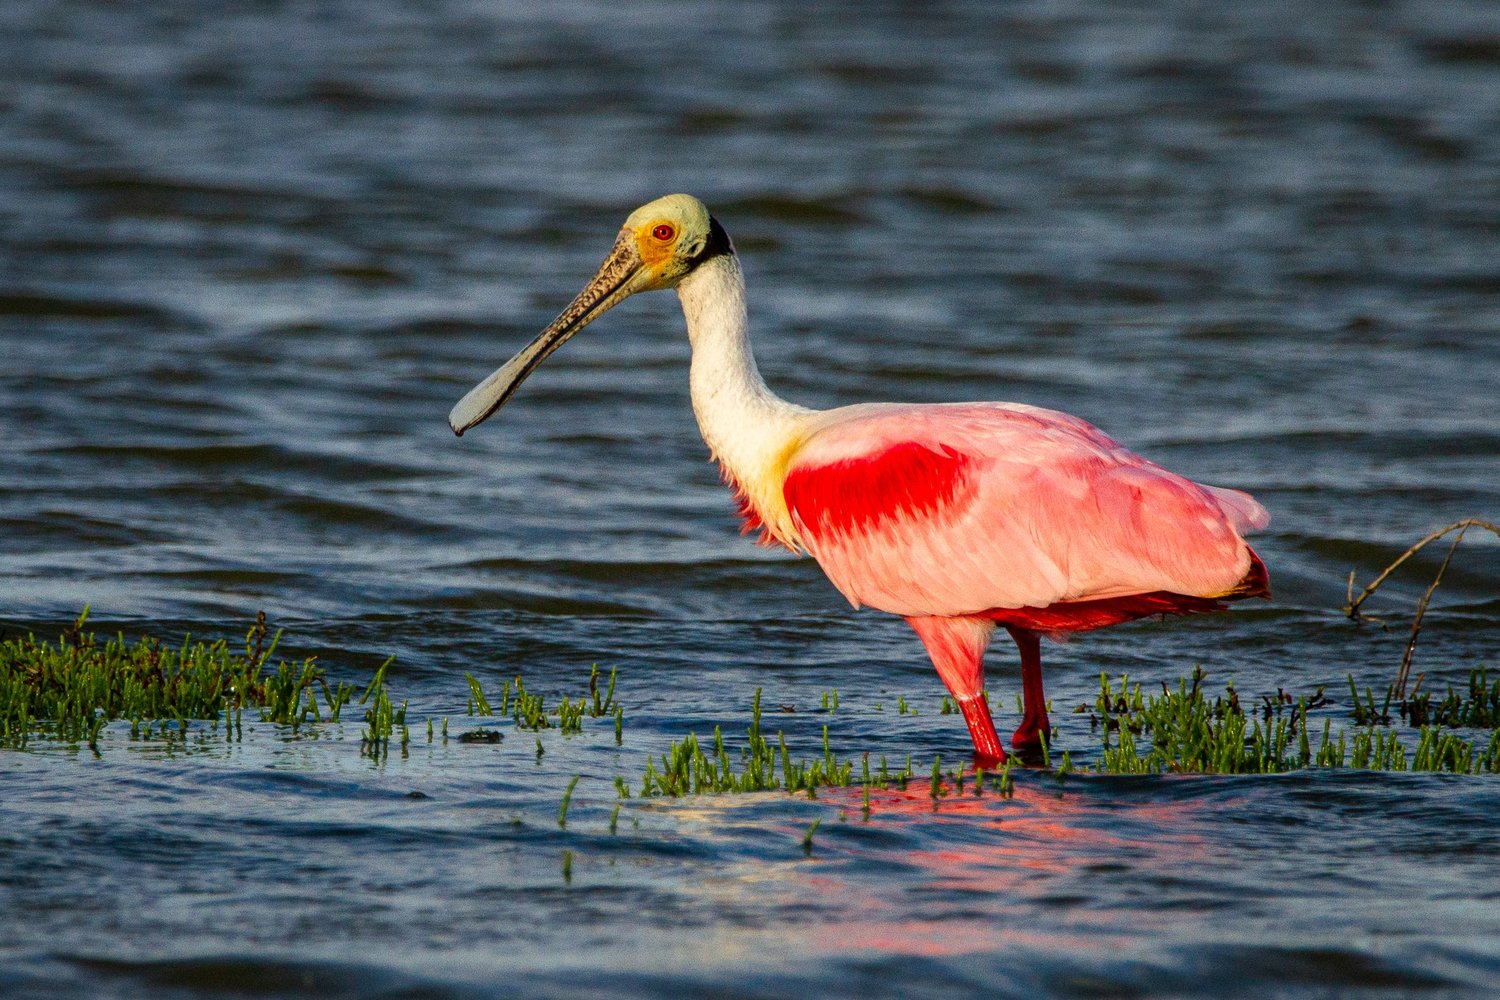 A roseate spoonbill wades in the shallow water.